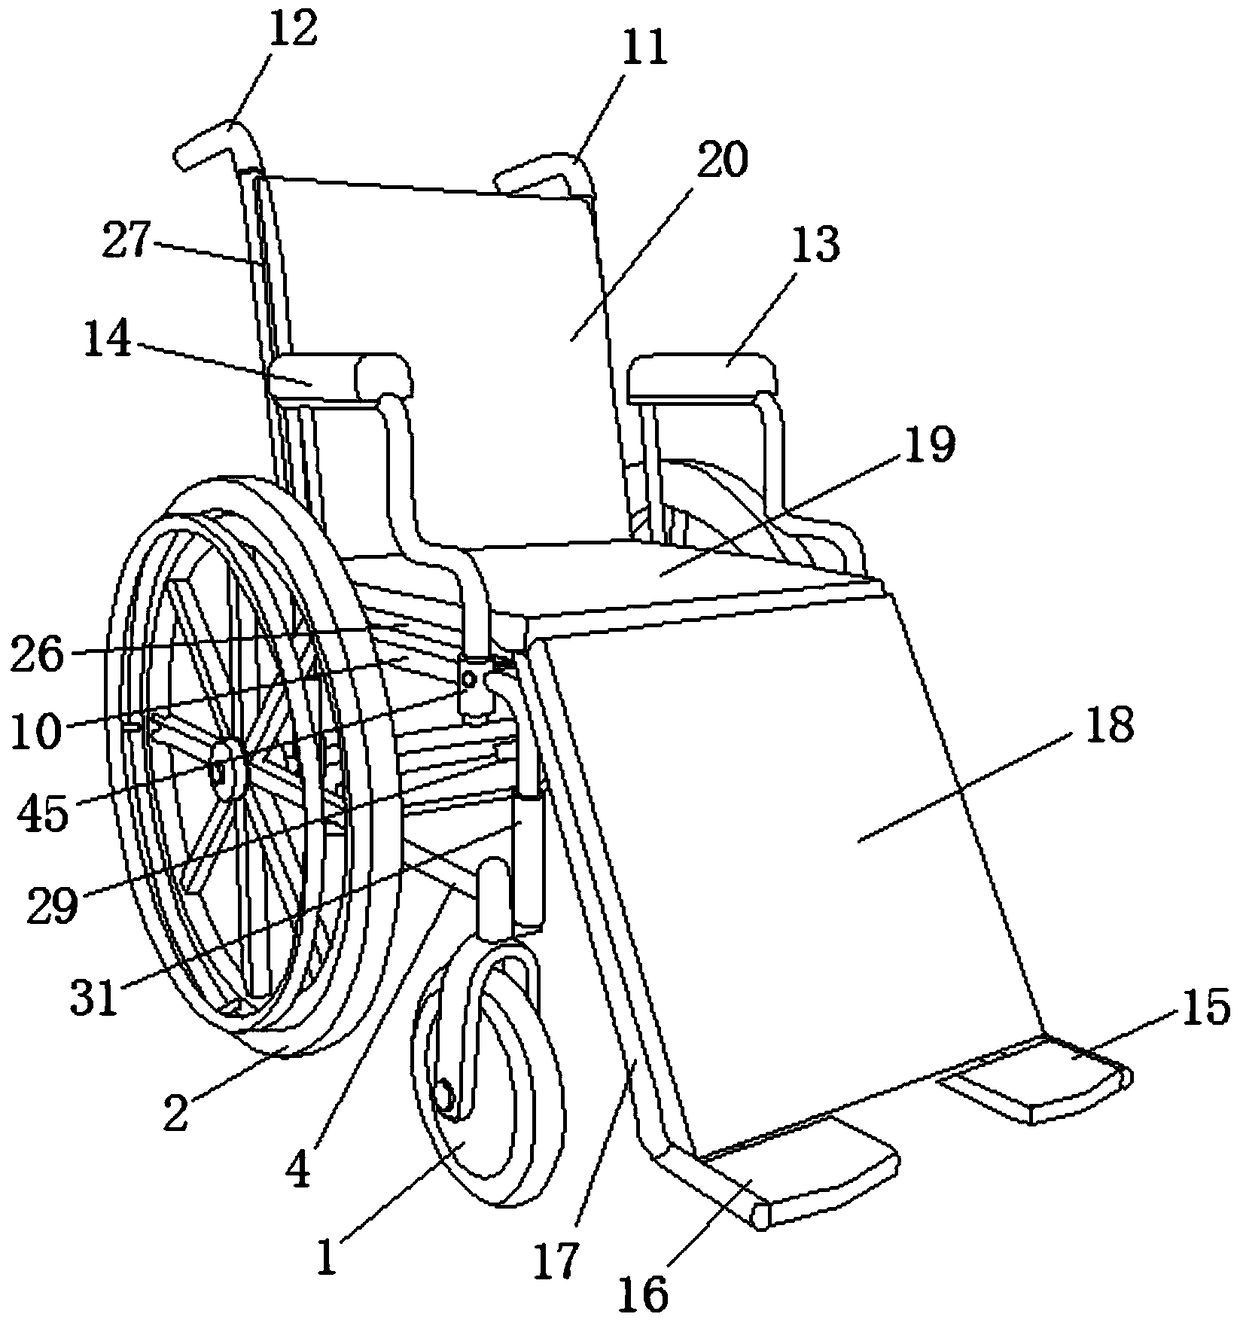 Transfer safety chair for facilitating lying of patient on magnetic resonance imaging (MRI) bed